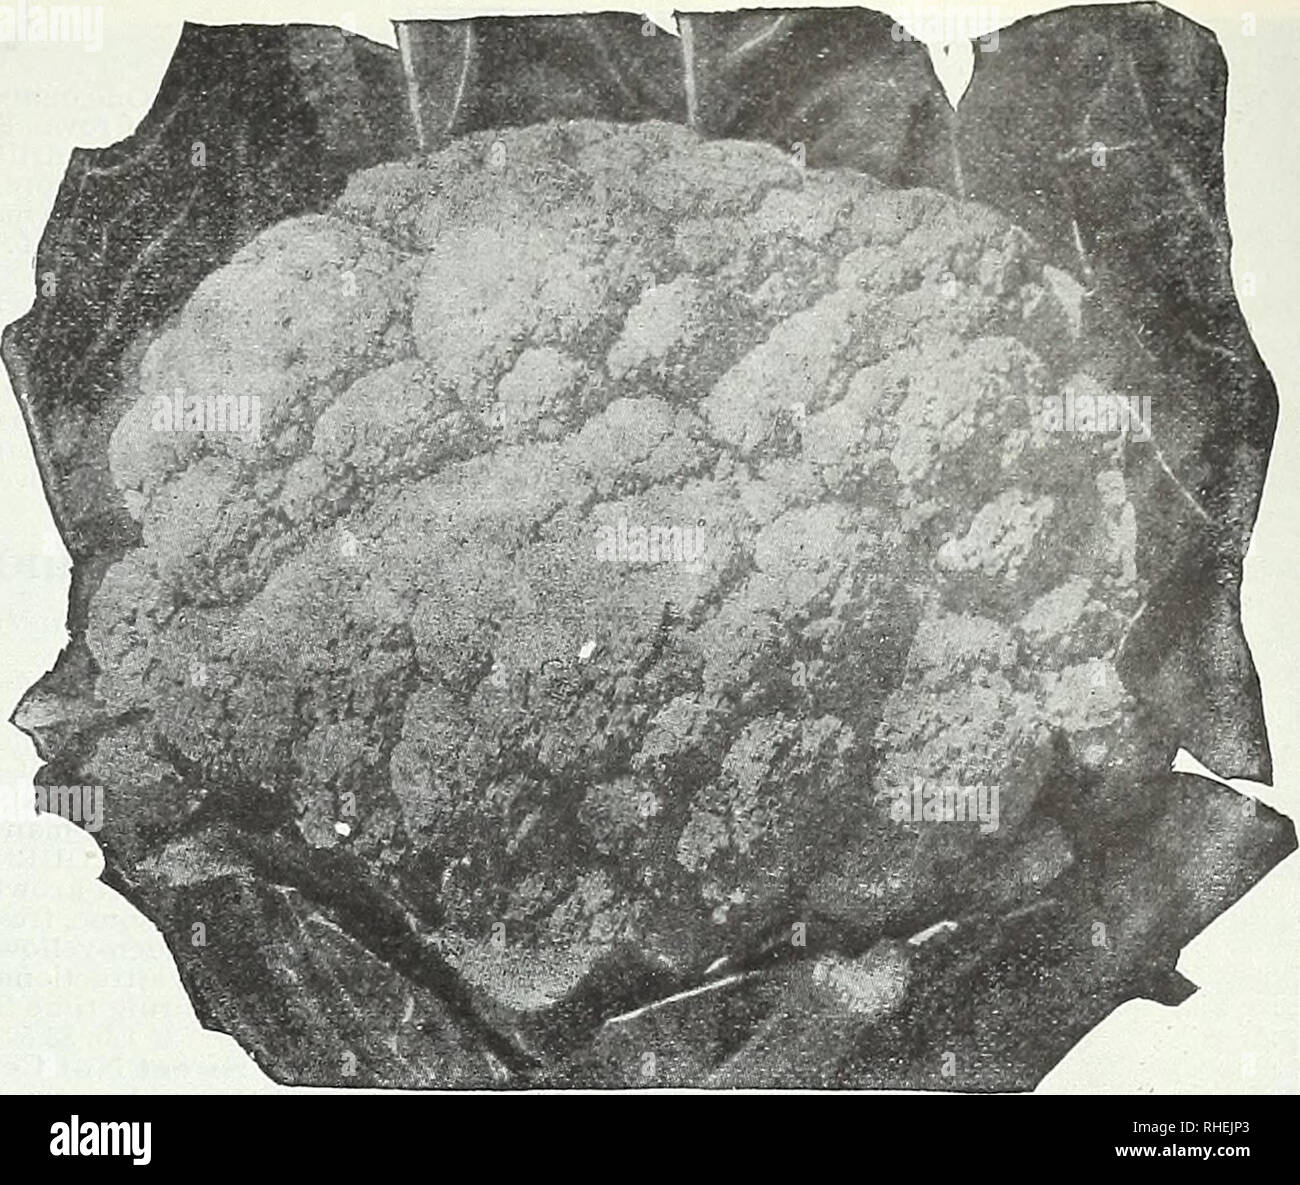 . Bolgiano's &quot;prosperity&quot; tomato. Seeds Maryland Baltimore Catalogs; Vegetables Maryland Baltimore Catalogs; Flowers Maryland Baltimore Catalogs; Fruit Maryland Baltimore Catalogs; Grasses Maryland Baltimore Catalogs; Gardening Maryland Baltimore Equipment and supplies Catalogs; Nurseries (Horticulture) Maryland Baltimore Catalogs. Trustworthy Vegetable Seeds For 1913 31 Cauliflower Chou-Fleur Colifior JBlumenfcobl One ounce ofseed will produce about 3000 plants. One-halfouncefurnished at ouncerates, and one-half pound fur- nislied at pound rates. CULTURE. For earliest Cauliflower, r Stock Photo